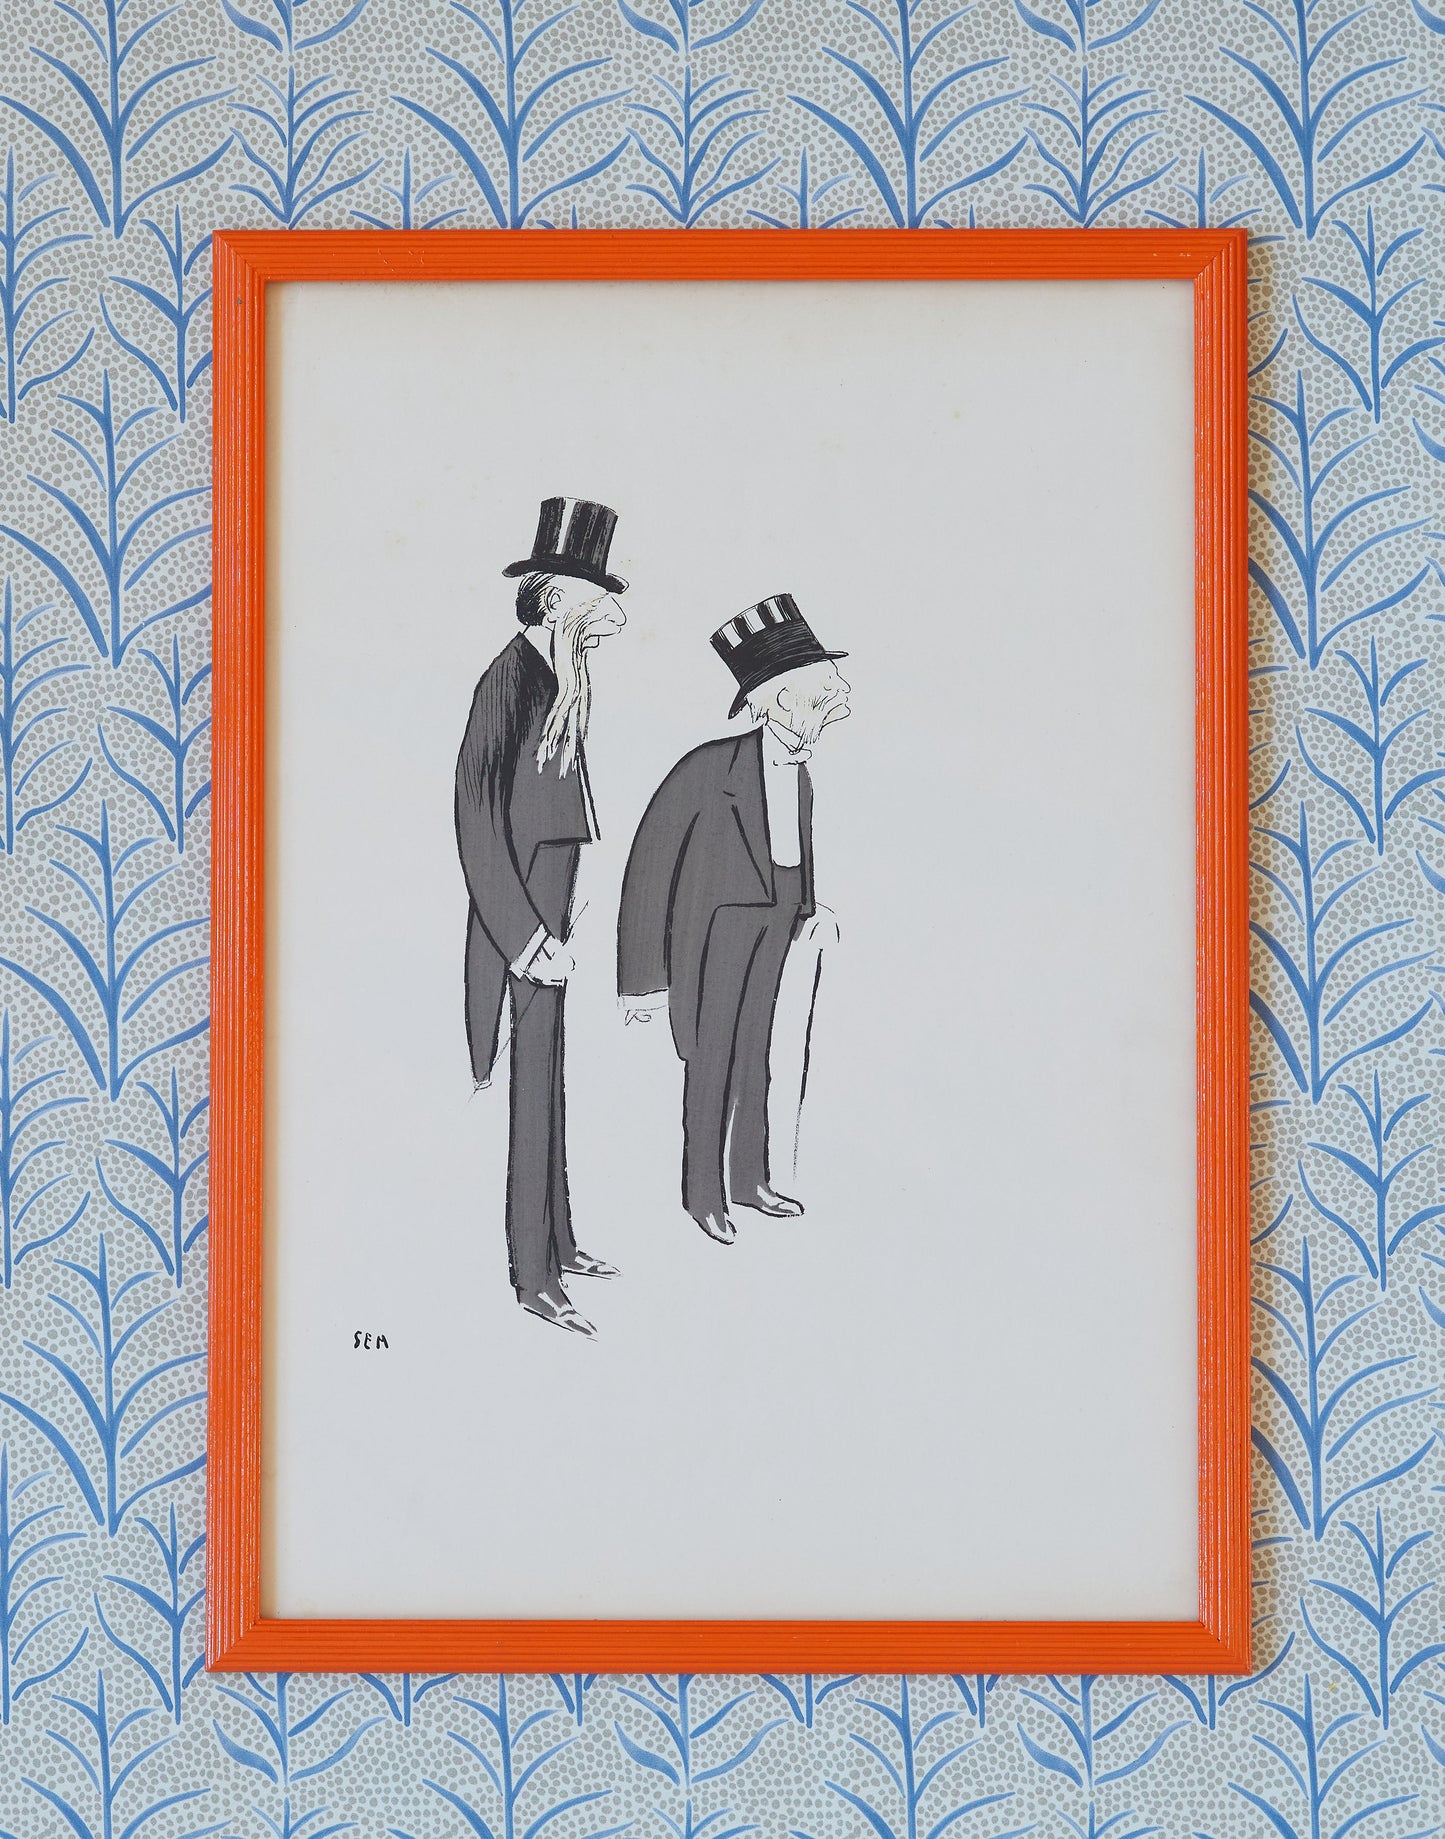 A Set of Six Early 20th Century Lithographs of Caricatures by Georges Goursat known as SEM